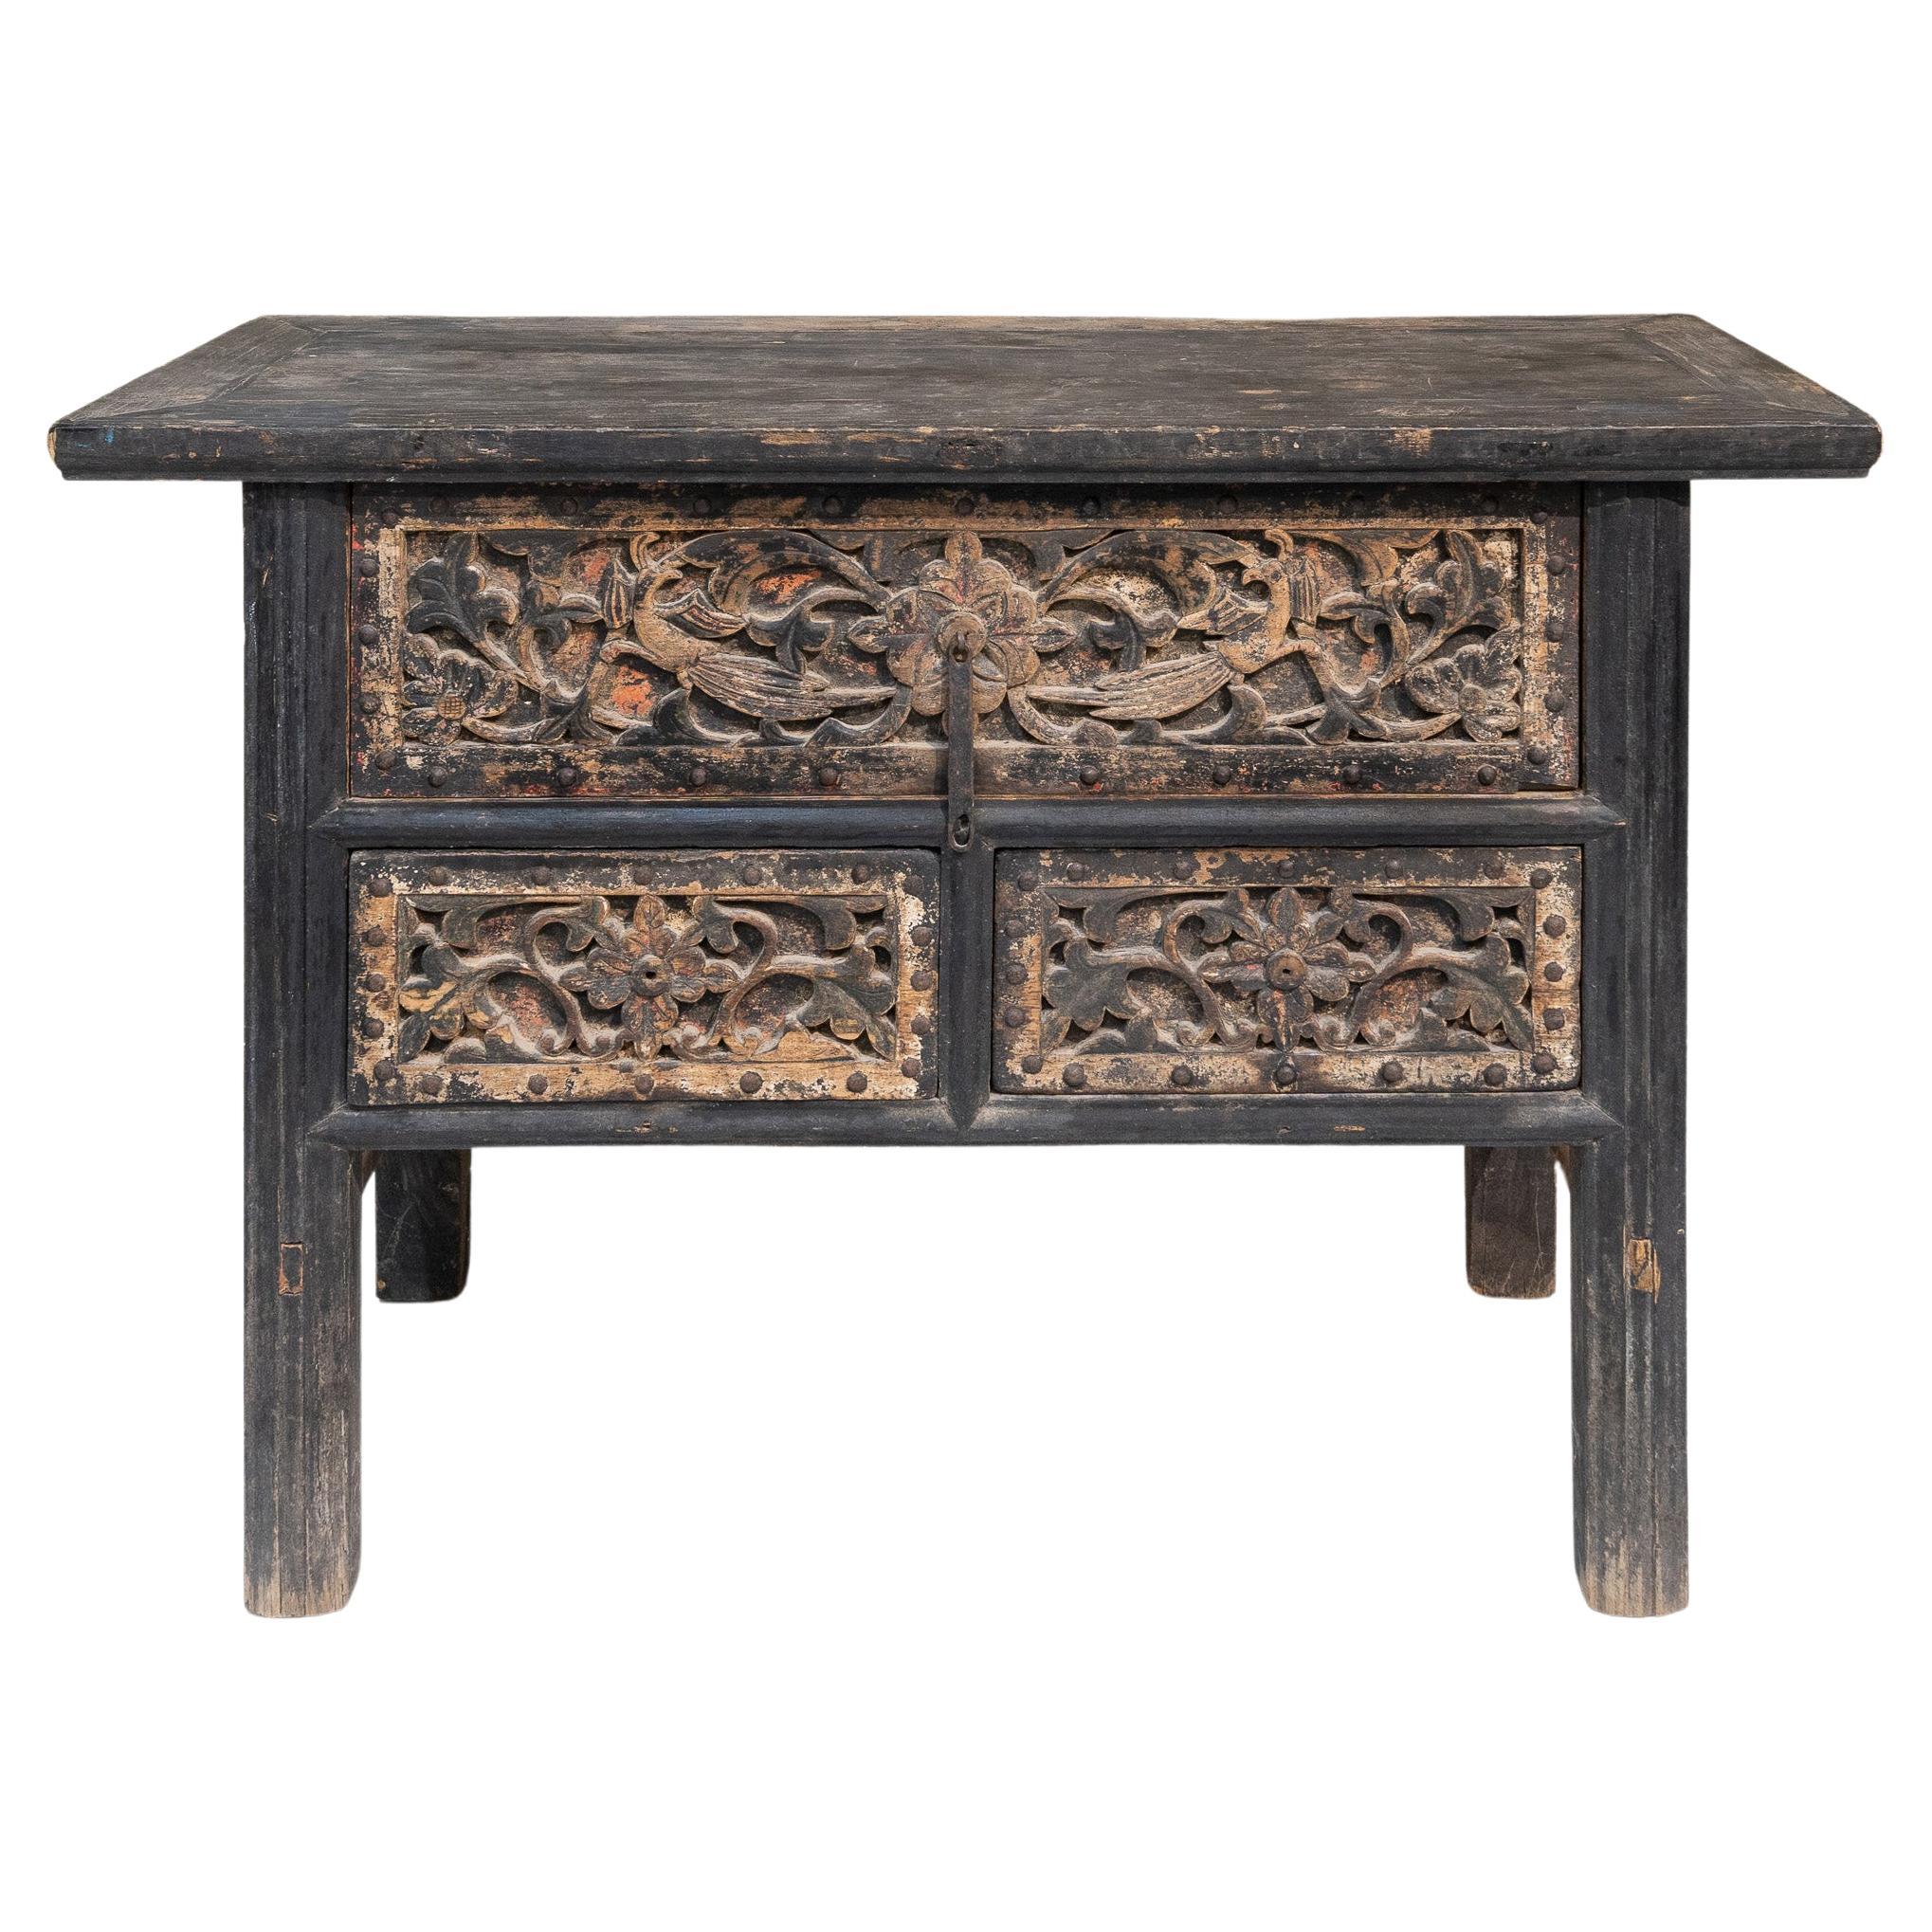 Late 19th Century Carved Coffer Table from Shanxi, China